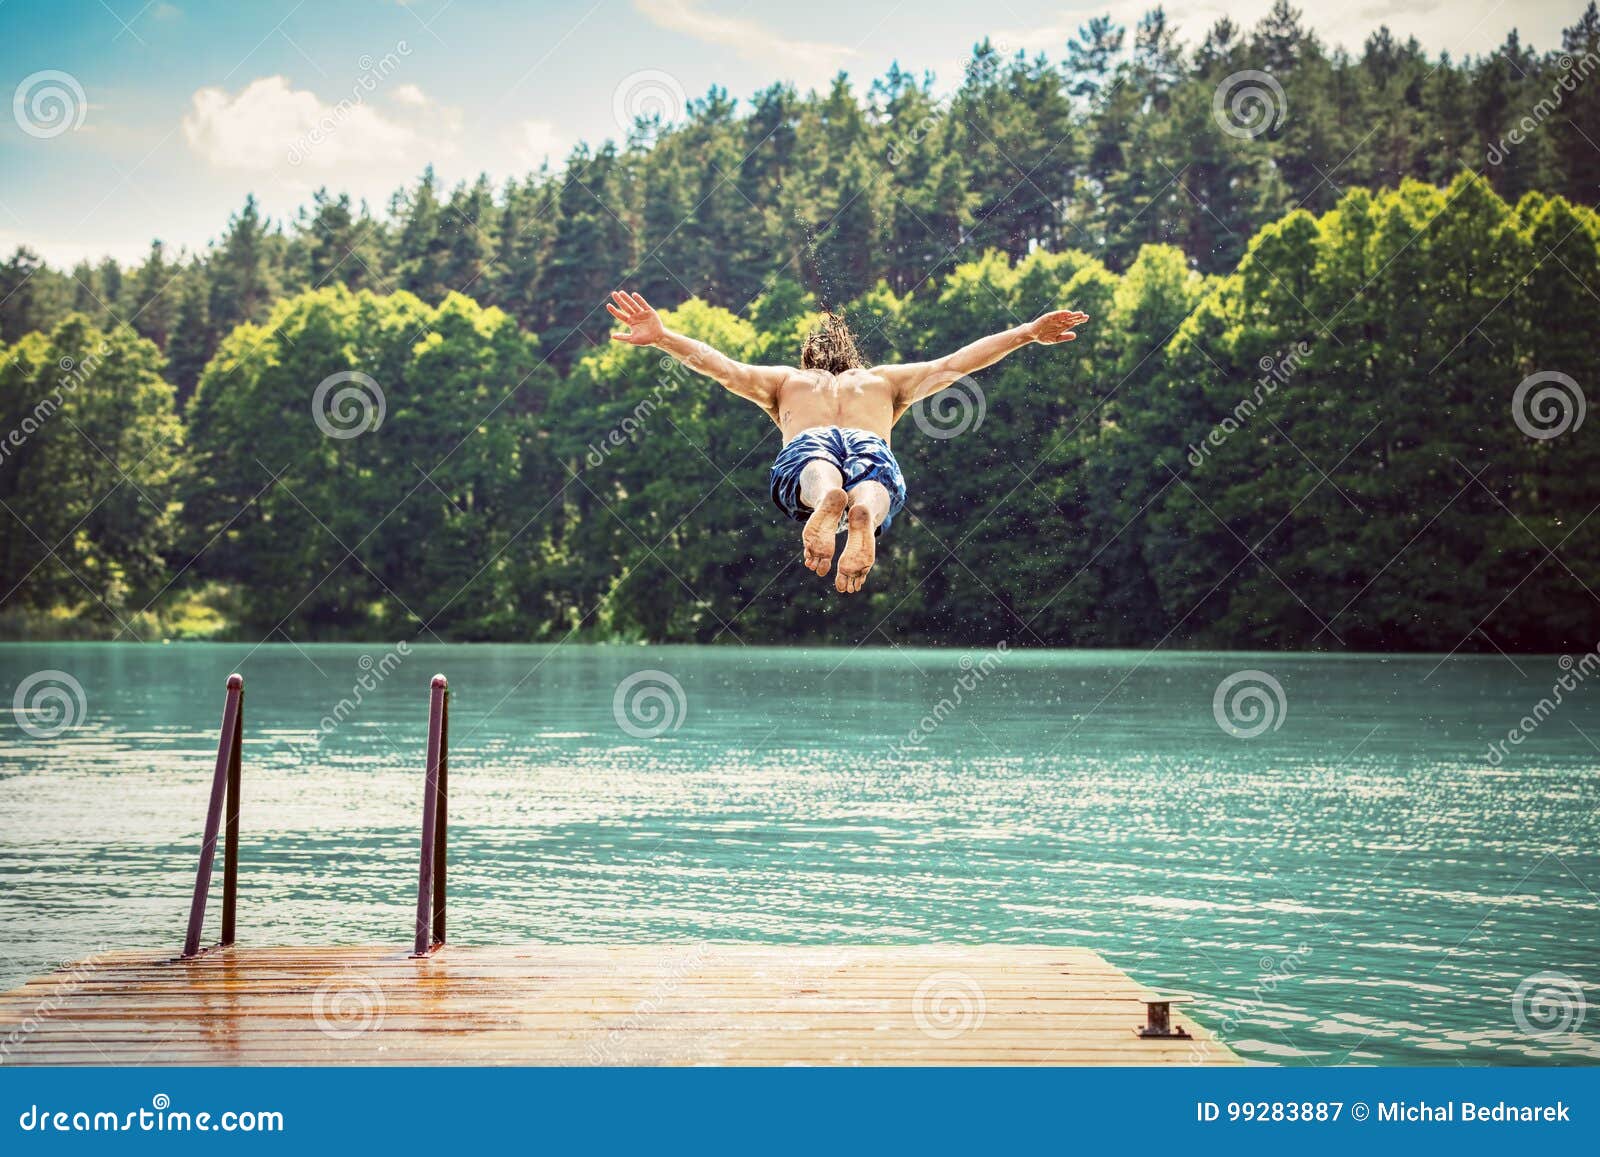 young fit man making a jump into a lake.